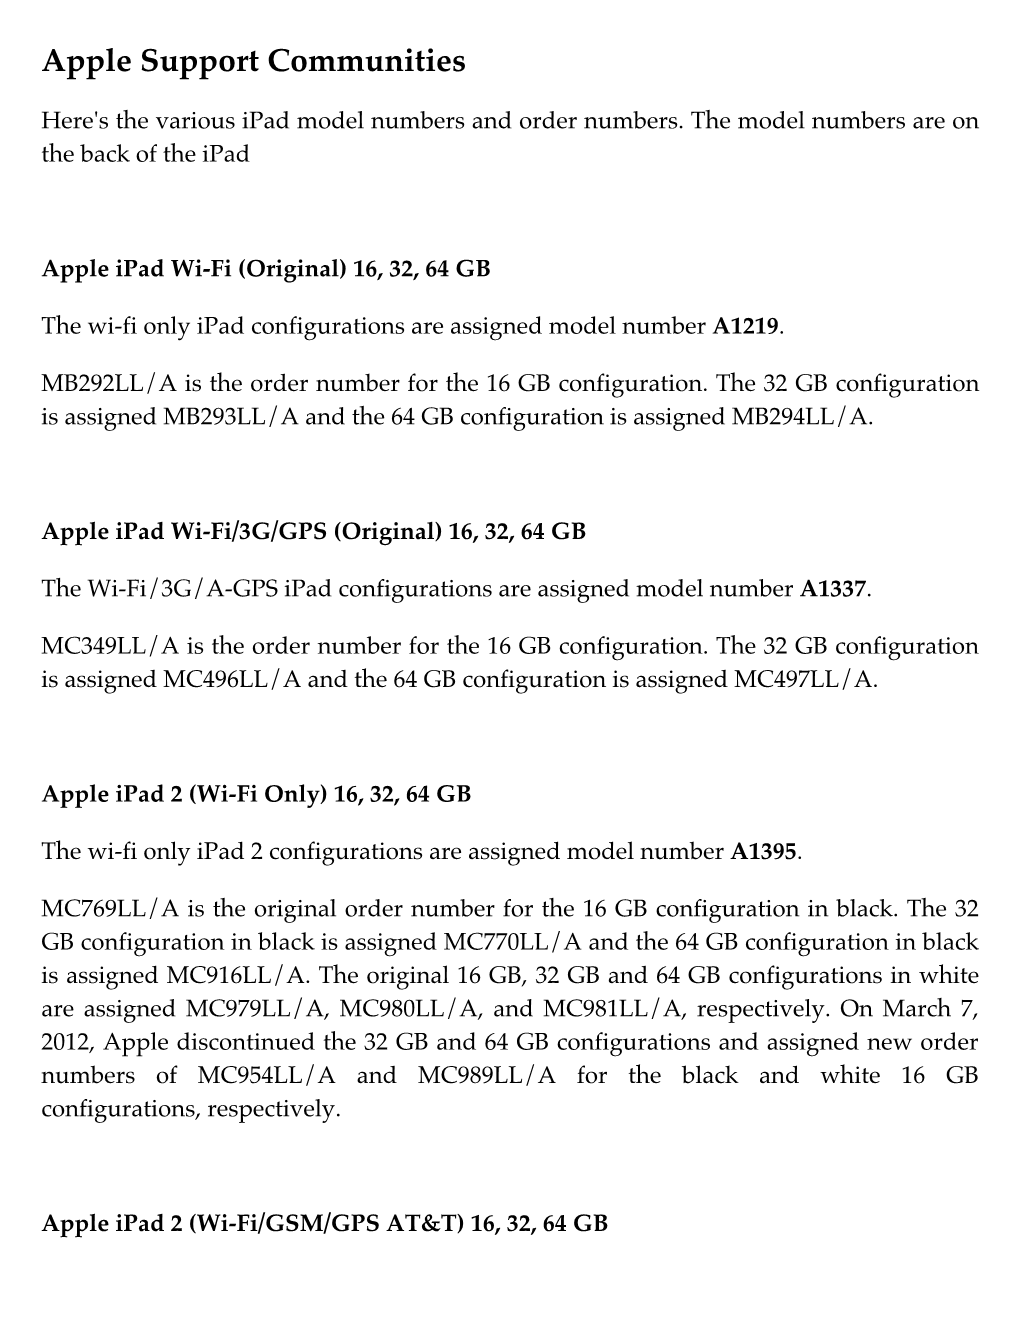 How to Tell Which Version of Ipad I...: Apple Support Communities